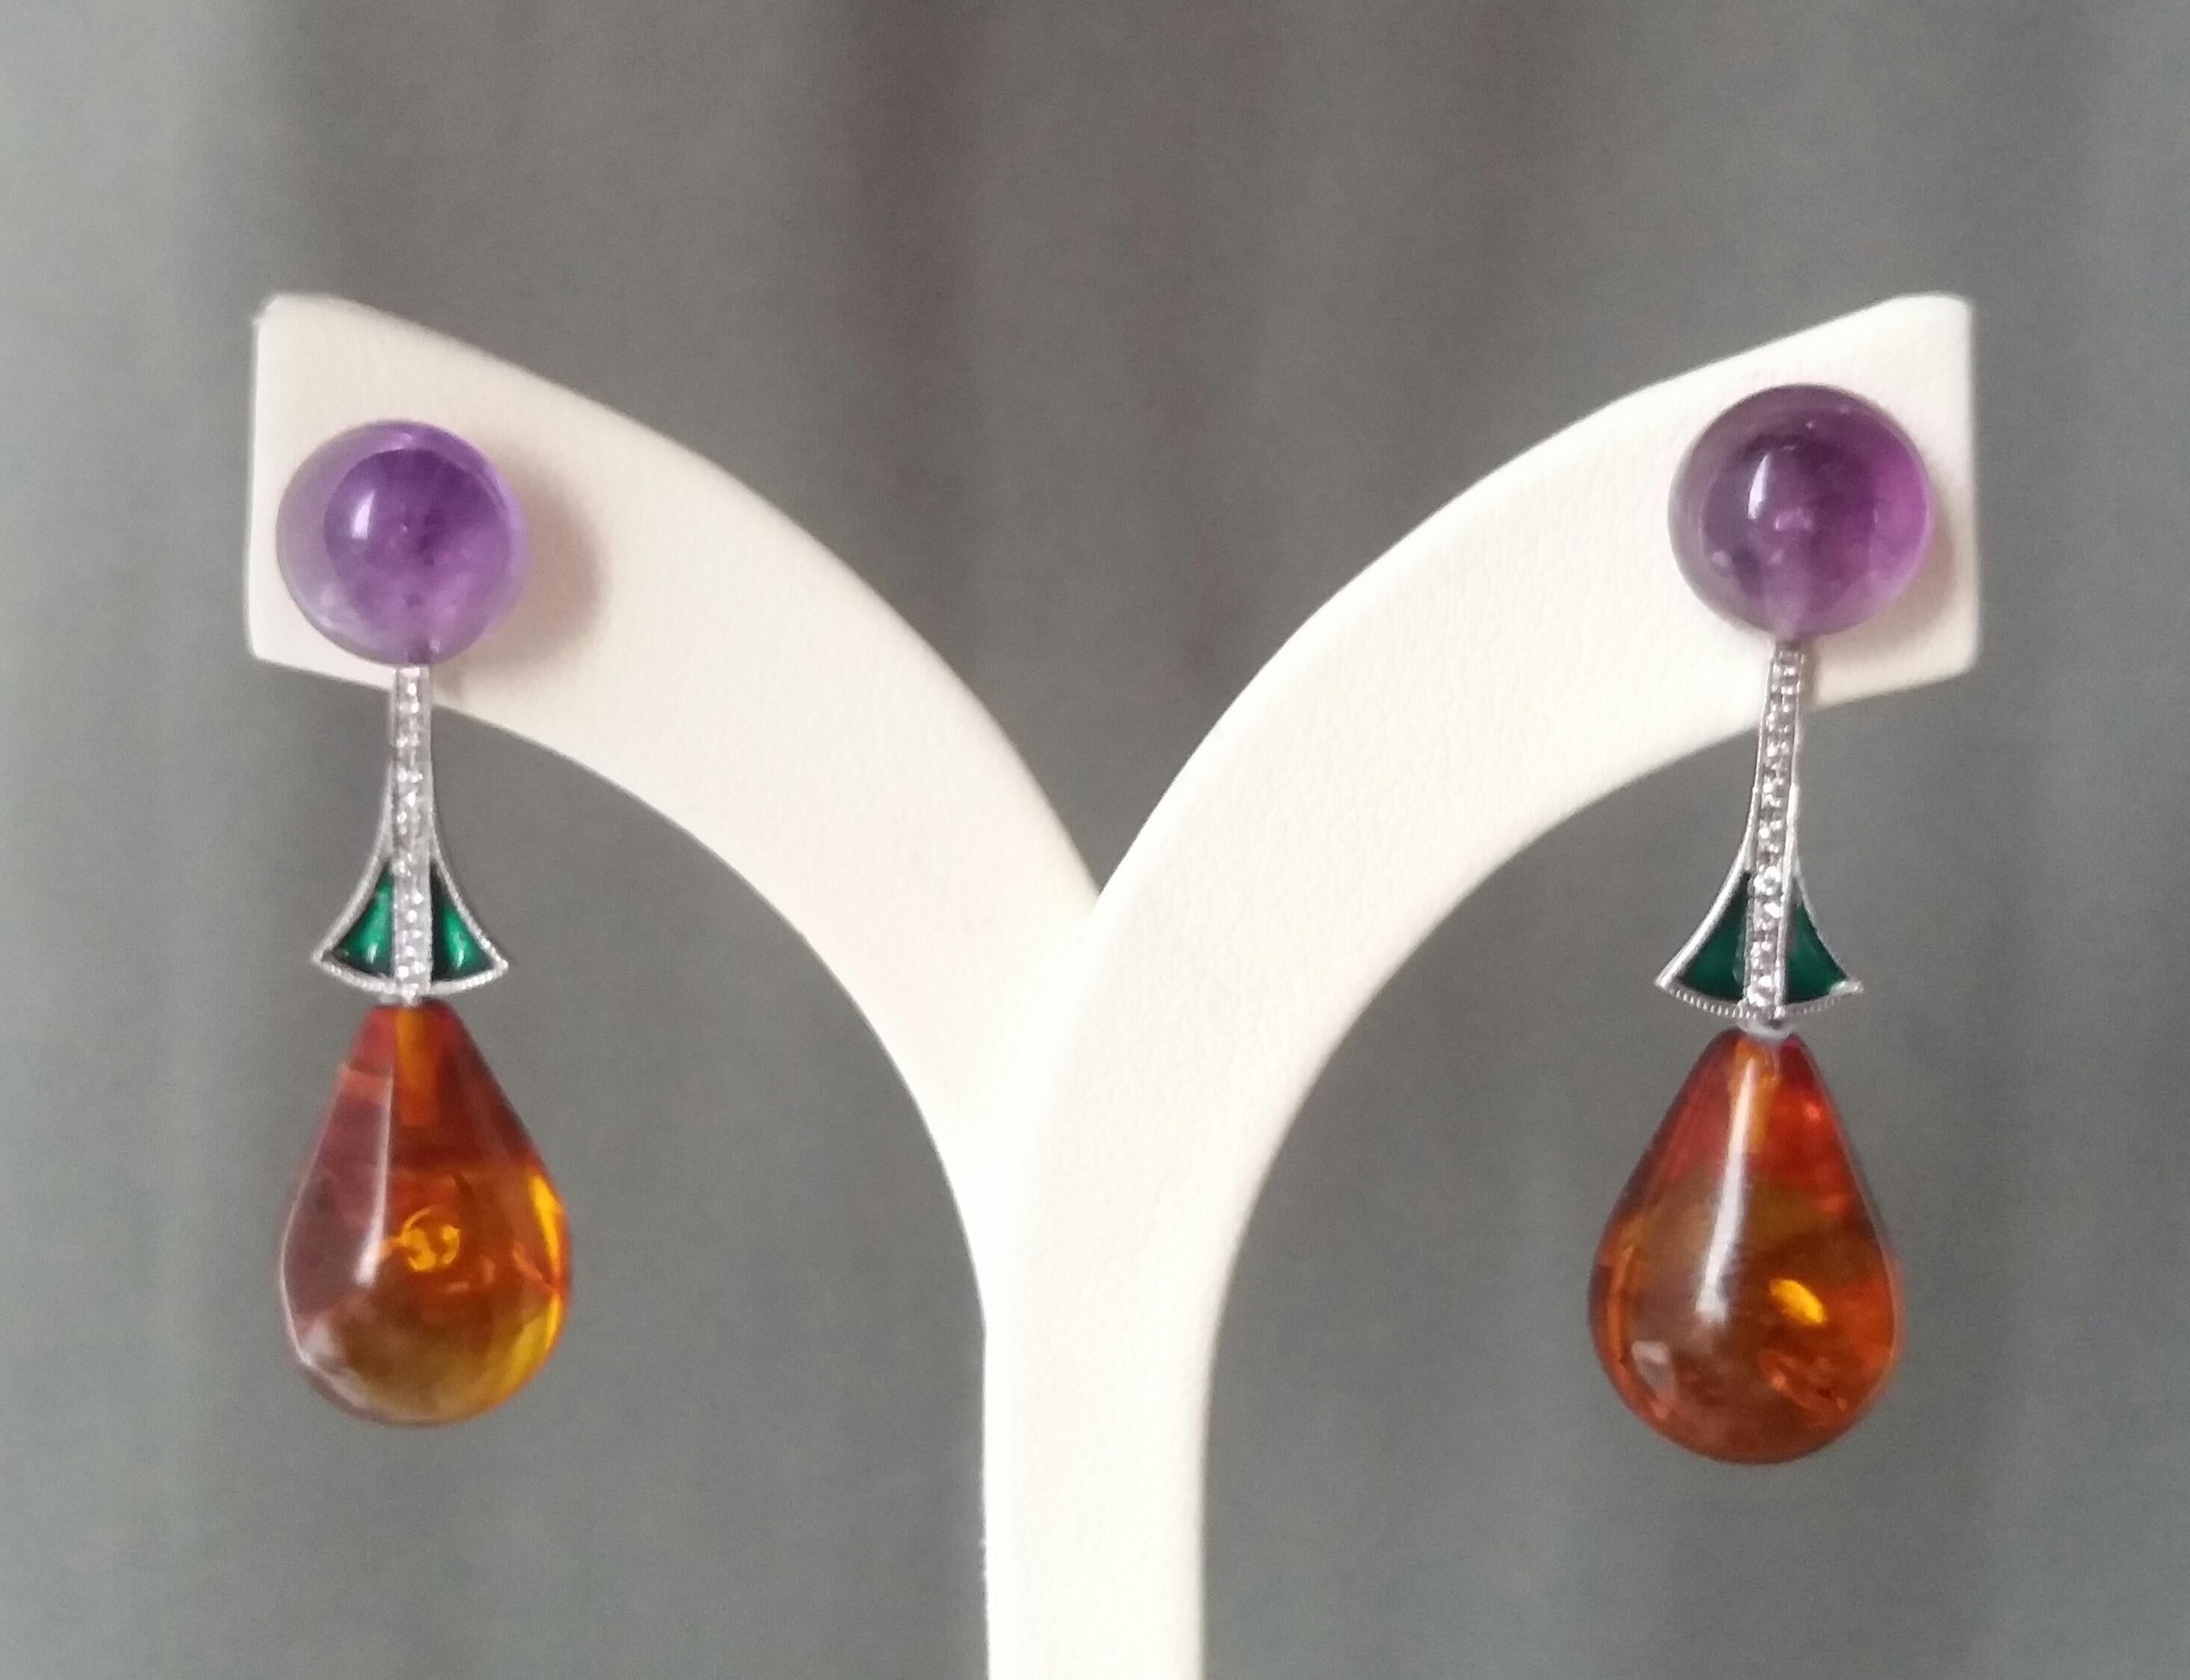 In this pair of earrings 2 round buttons of amethyst diameter 10mm. support 2 elements in white gold diamonds and green enamel, the bottom is composed of 2 Amber round drops size 18 x 12 mm.
In 1978 our workshop started in Italy to make simple-chic